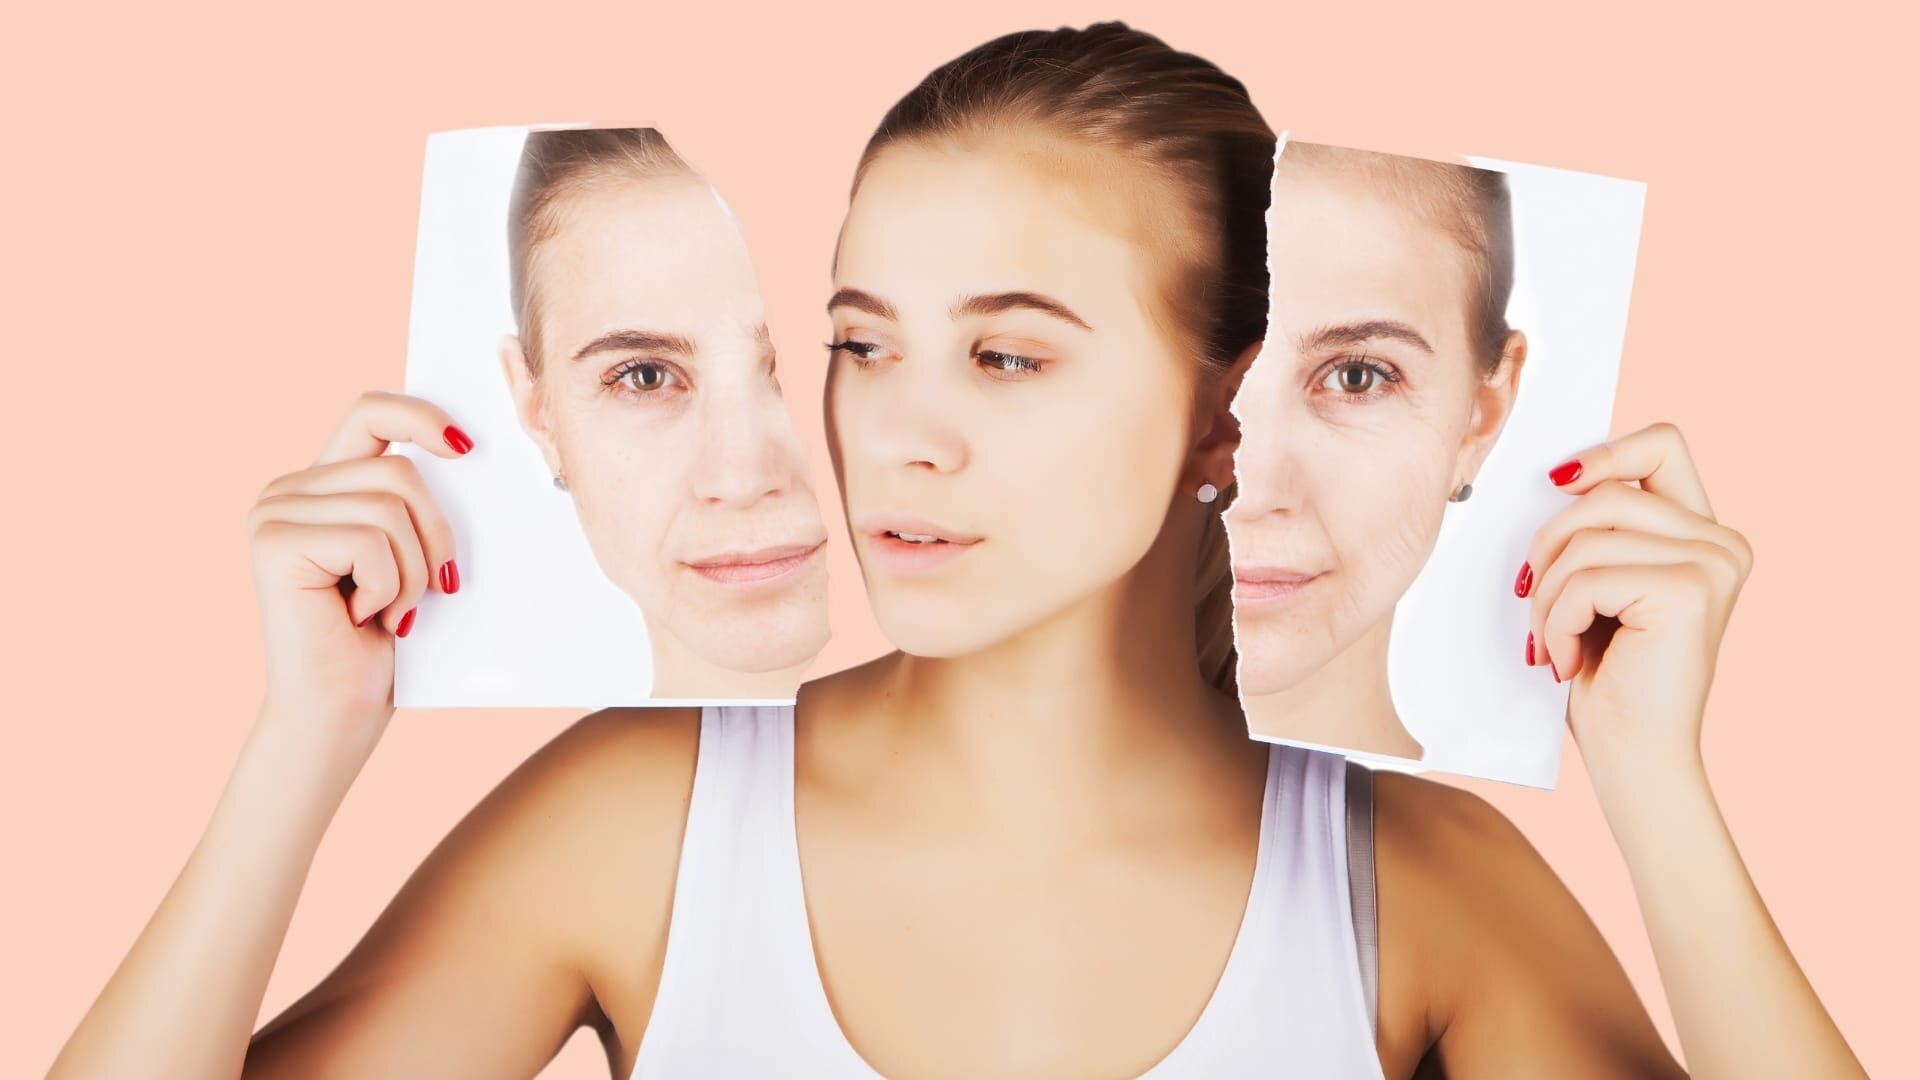 Sætte Til fods galdeblæren How to Stay Looking Young: 7 Anti-Aging Tips to Follow | Kim Gallo Esthetics